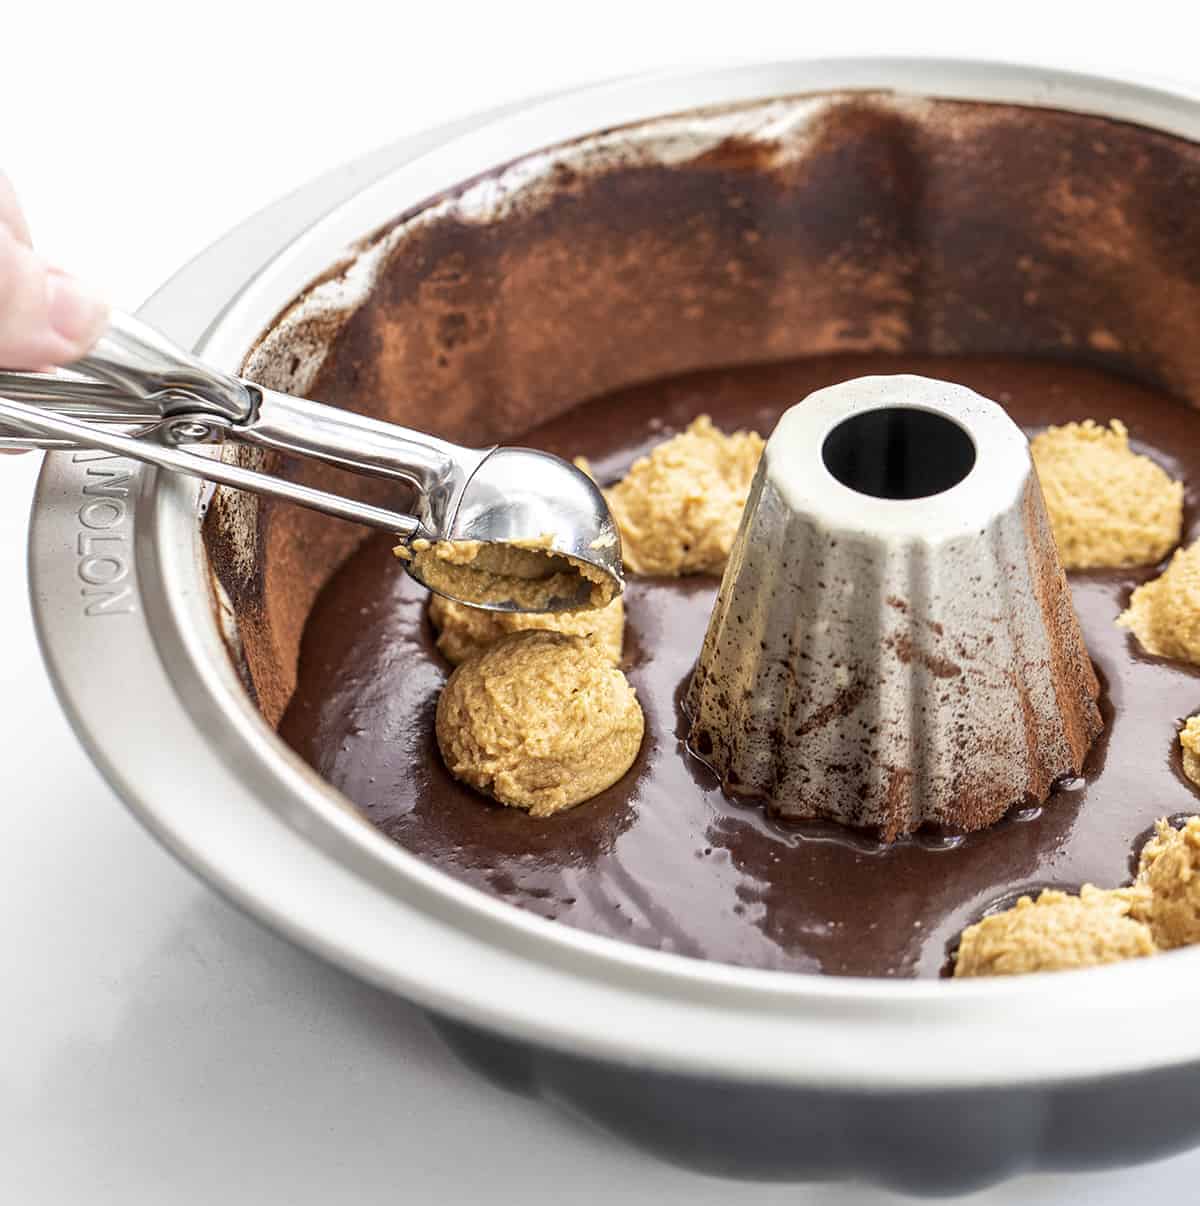 Adding Peanut Butter Filling to Chocolate Peanut Butter Bundt Cake Batter in Cocoa Lined Cake Pan